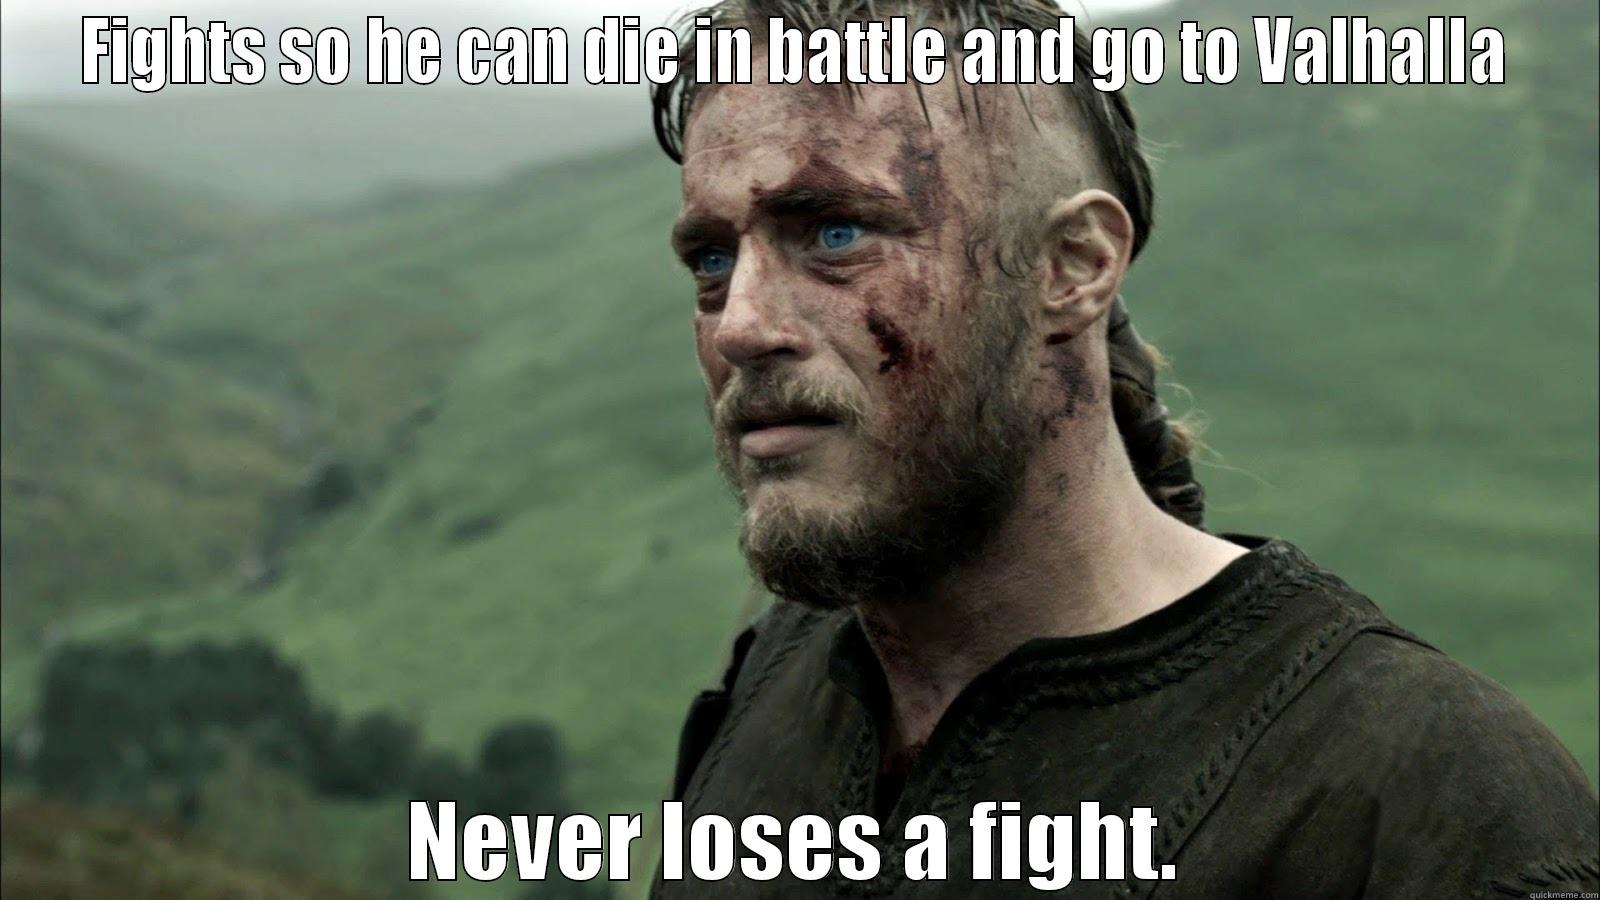 Viking Problem - FIGHTS SO HE CAN DIE IN BATTLE AND GO TO VALHALLA NEVER LOSES A FIGHT. Misc